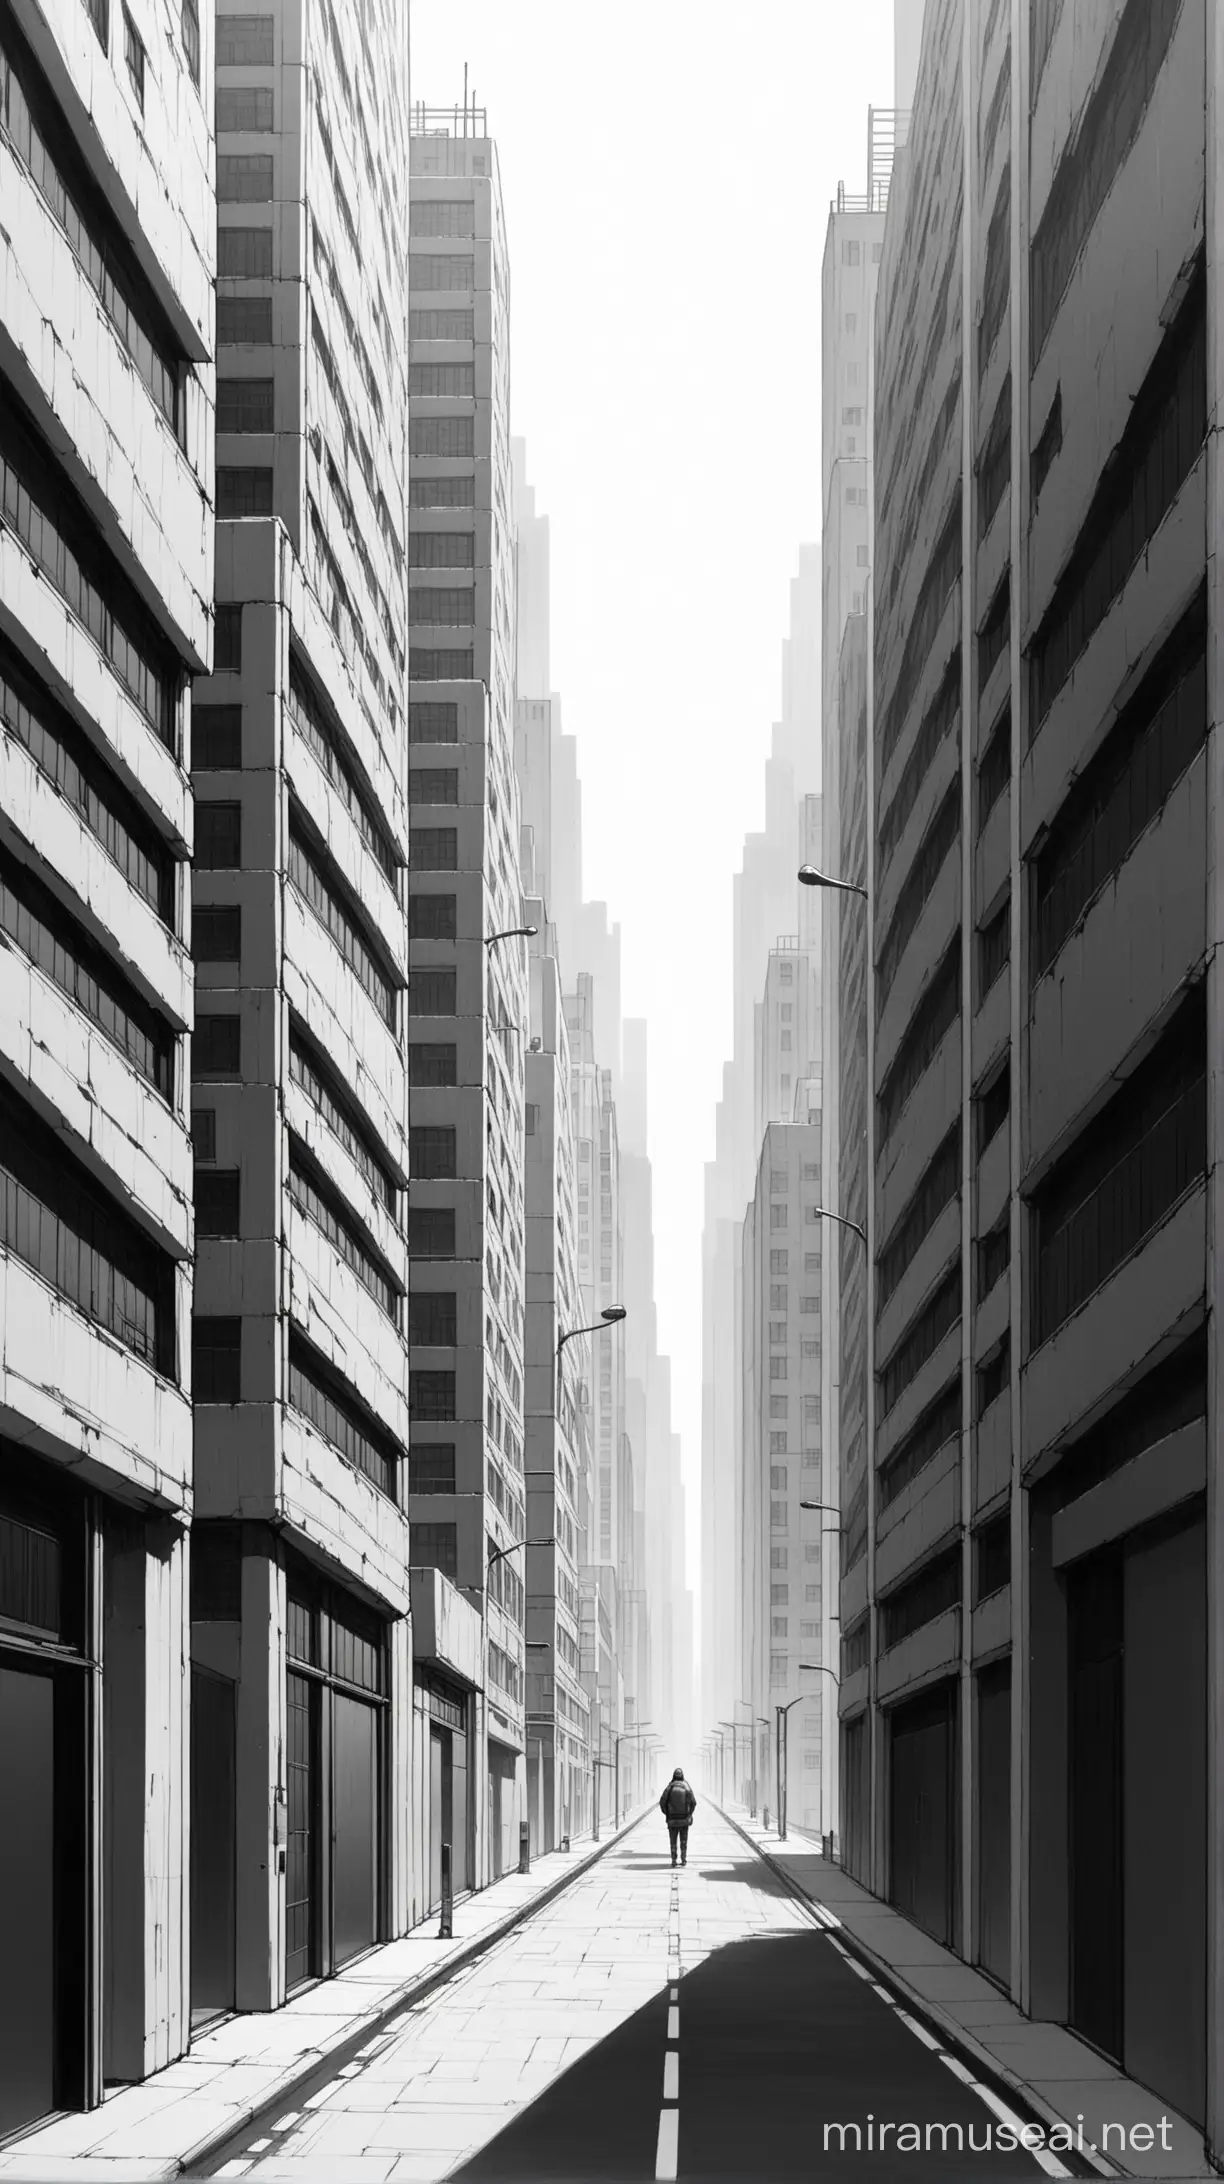 Urban Explorer amidst Minimalist Cityscape with Varied Heights Buildings